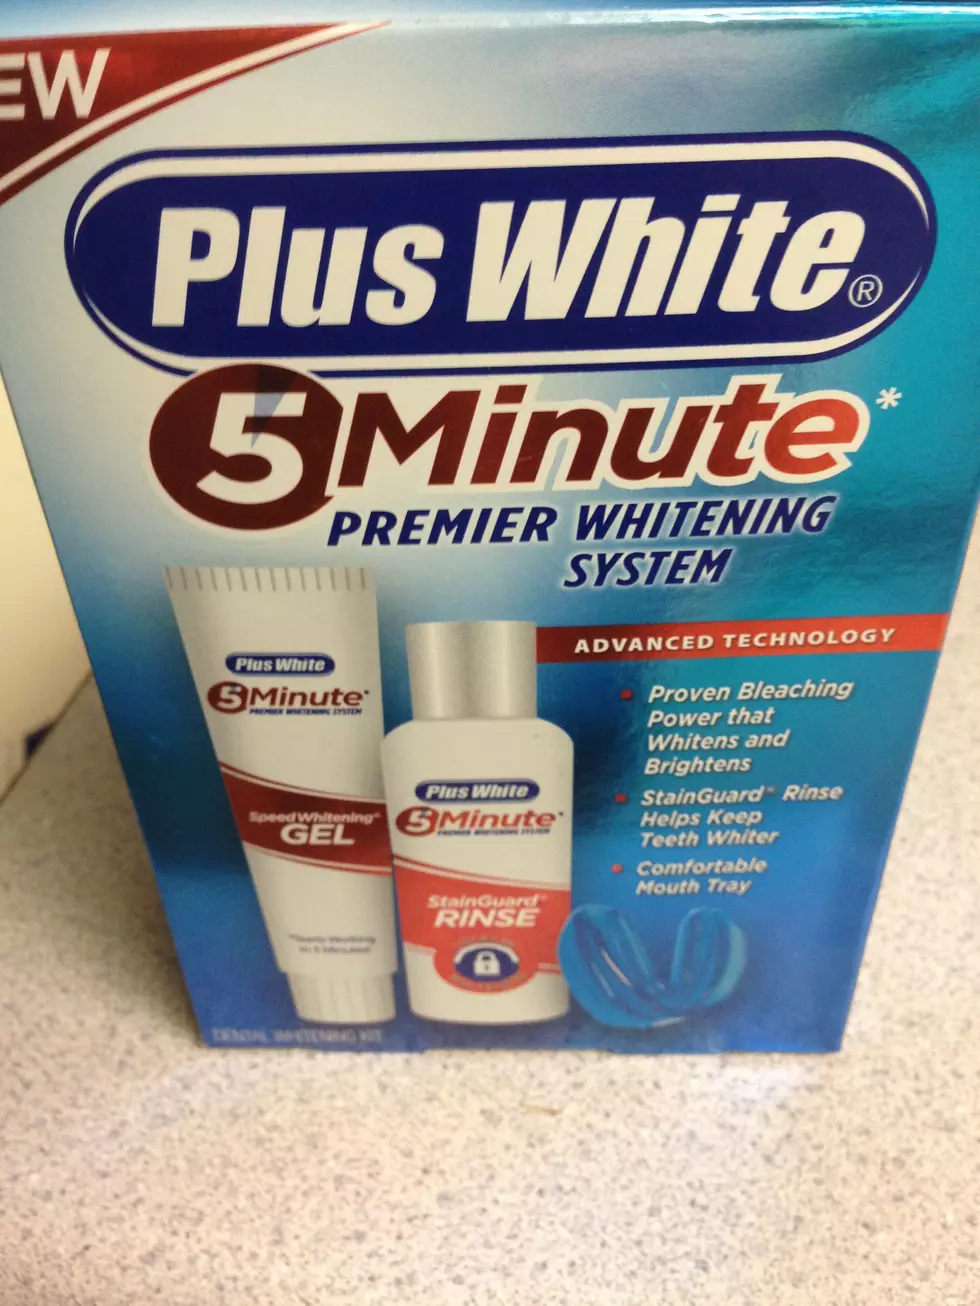 Whiter Teeth in Five Minutes!